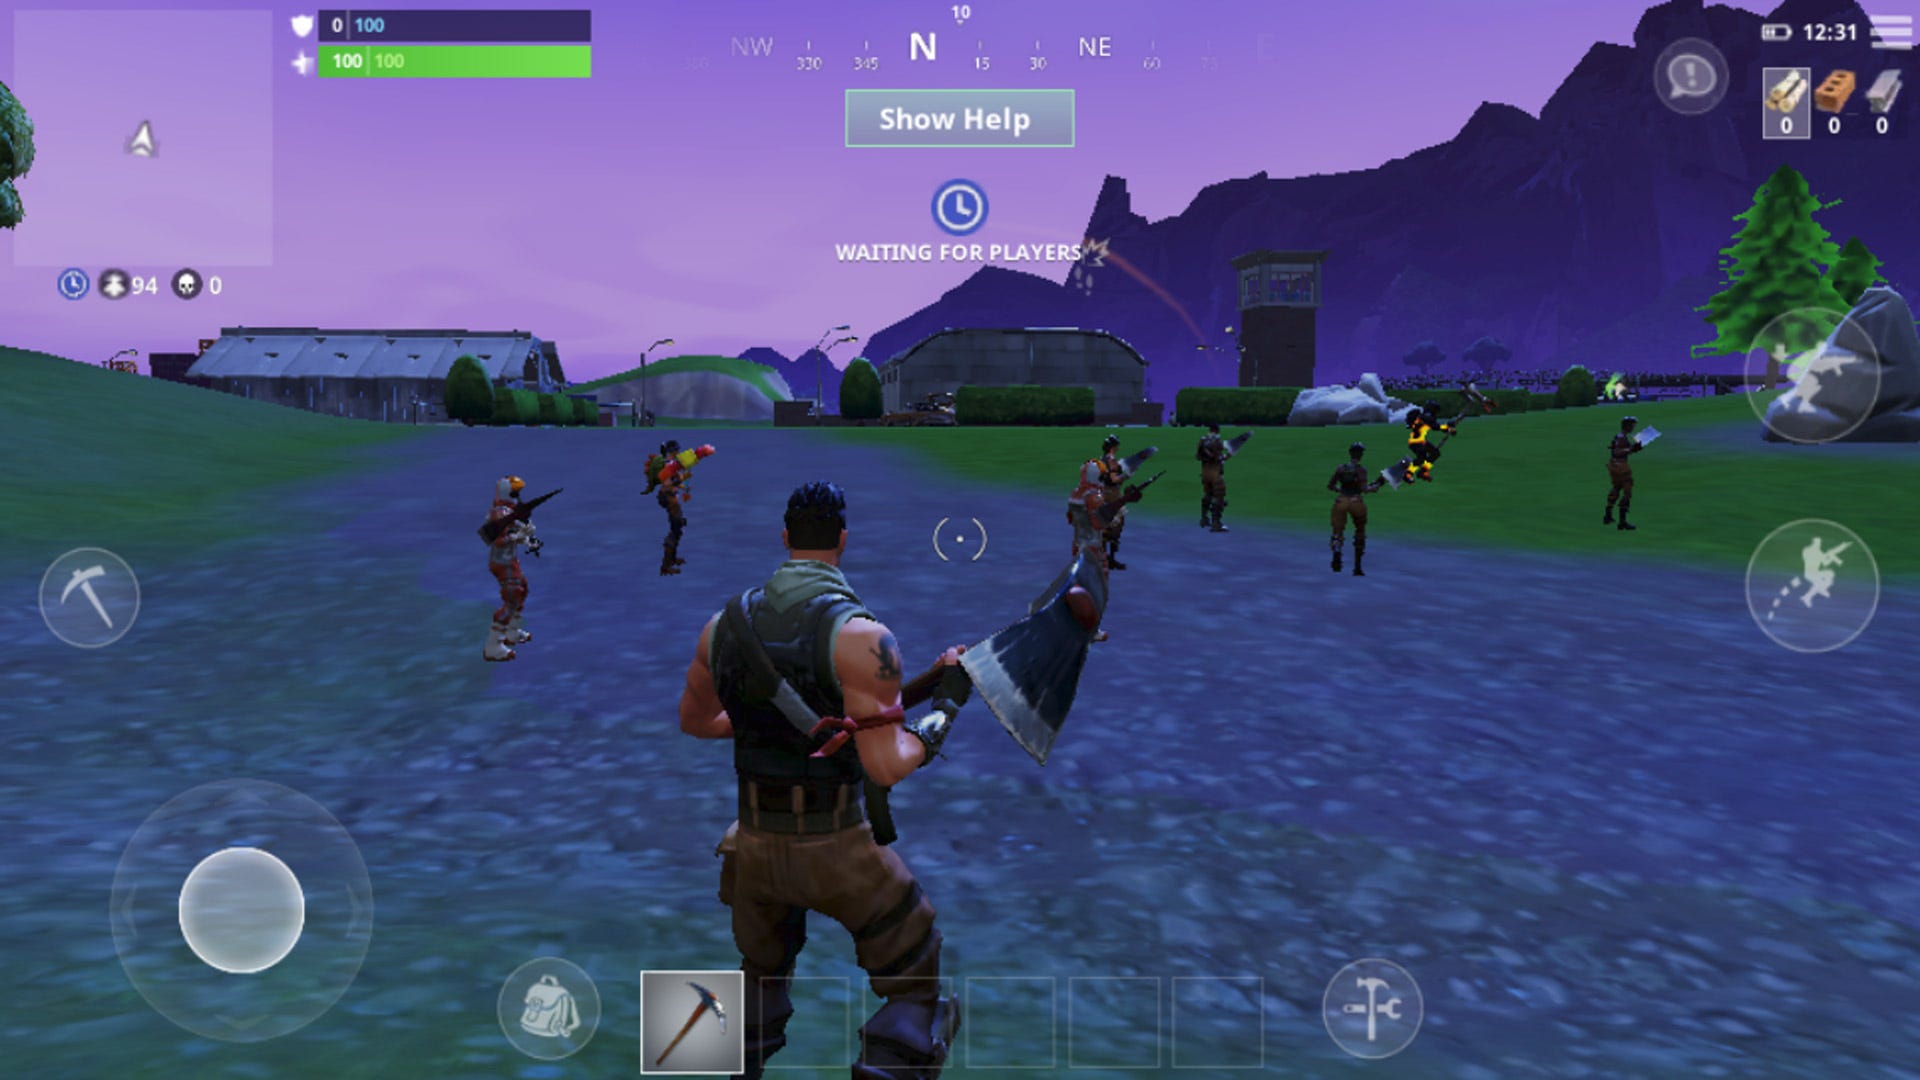 Fortnite Cheat Codes V Bucks Free Download Online For Mobile Ios And Android Xbox Ps4 Windows By Rimawhytdd Medium